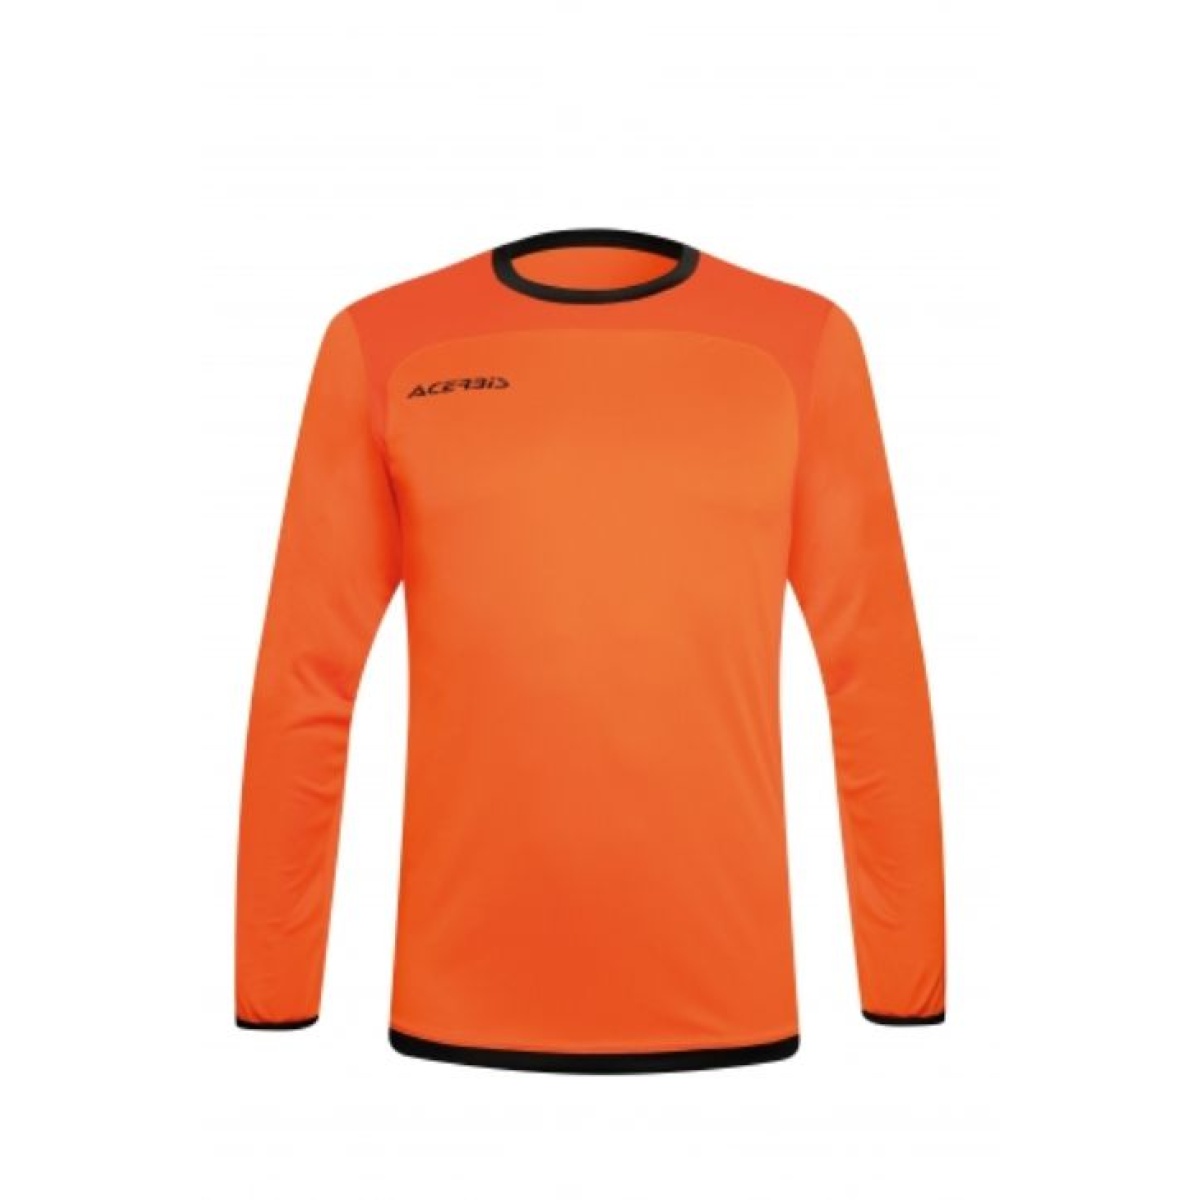 Canvey Island Youth FC - CIYFC Away GK Jersey, Canvey Island Youth FC, Canvey Island United FC, Custom Image Product